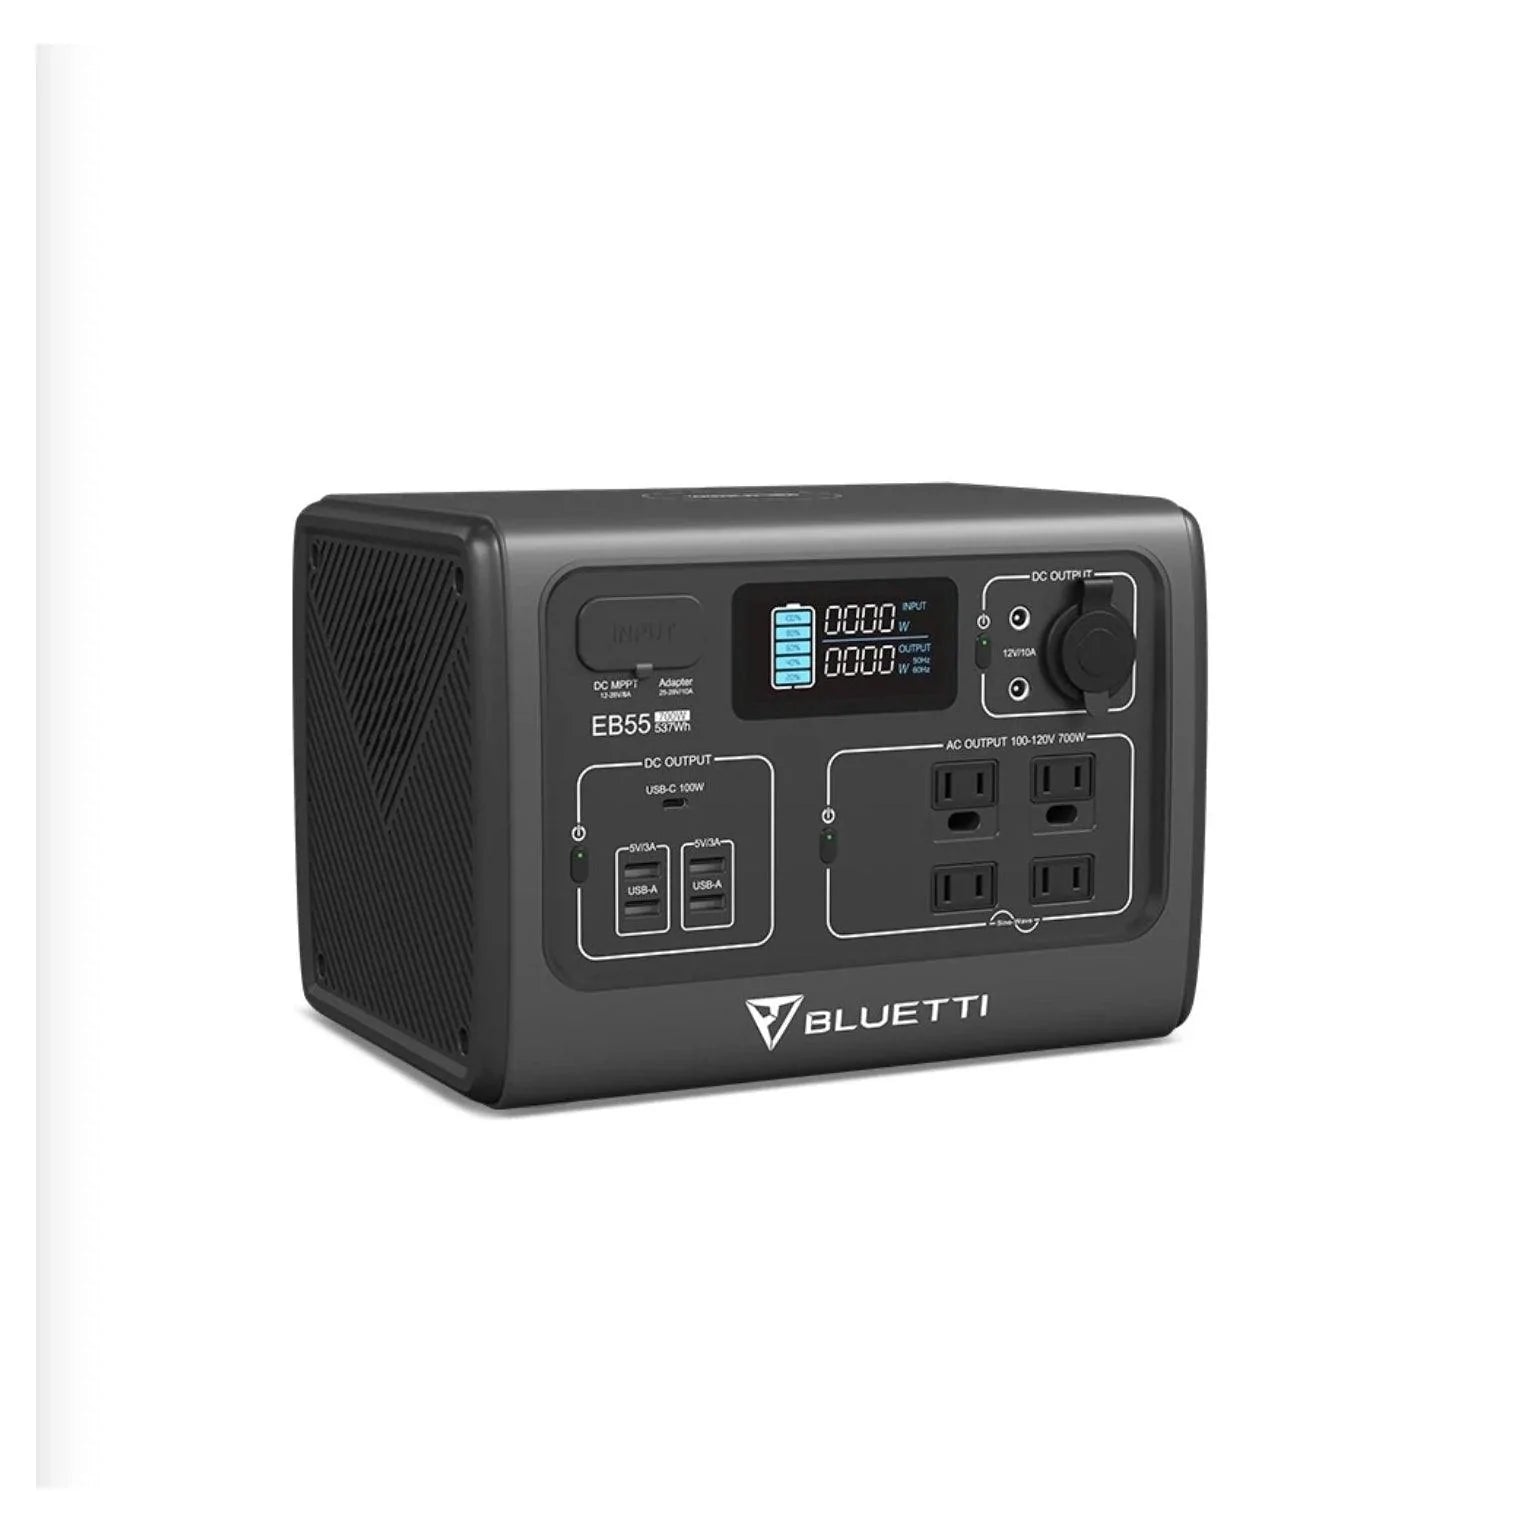 Bluetti EB70 portable power station: Tried & Tested review